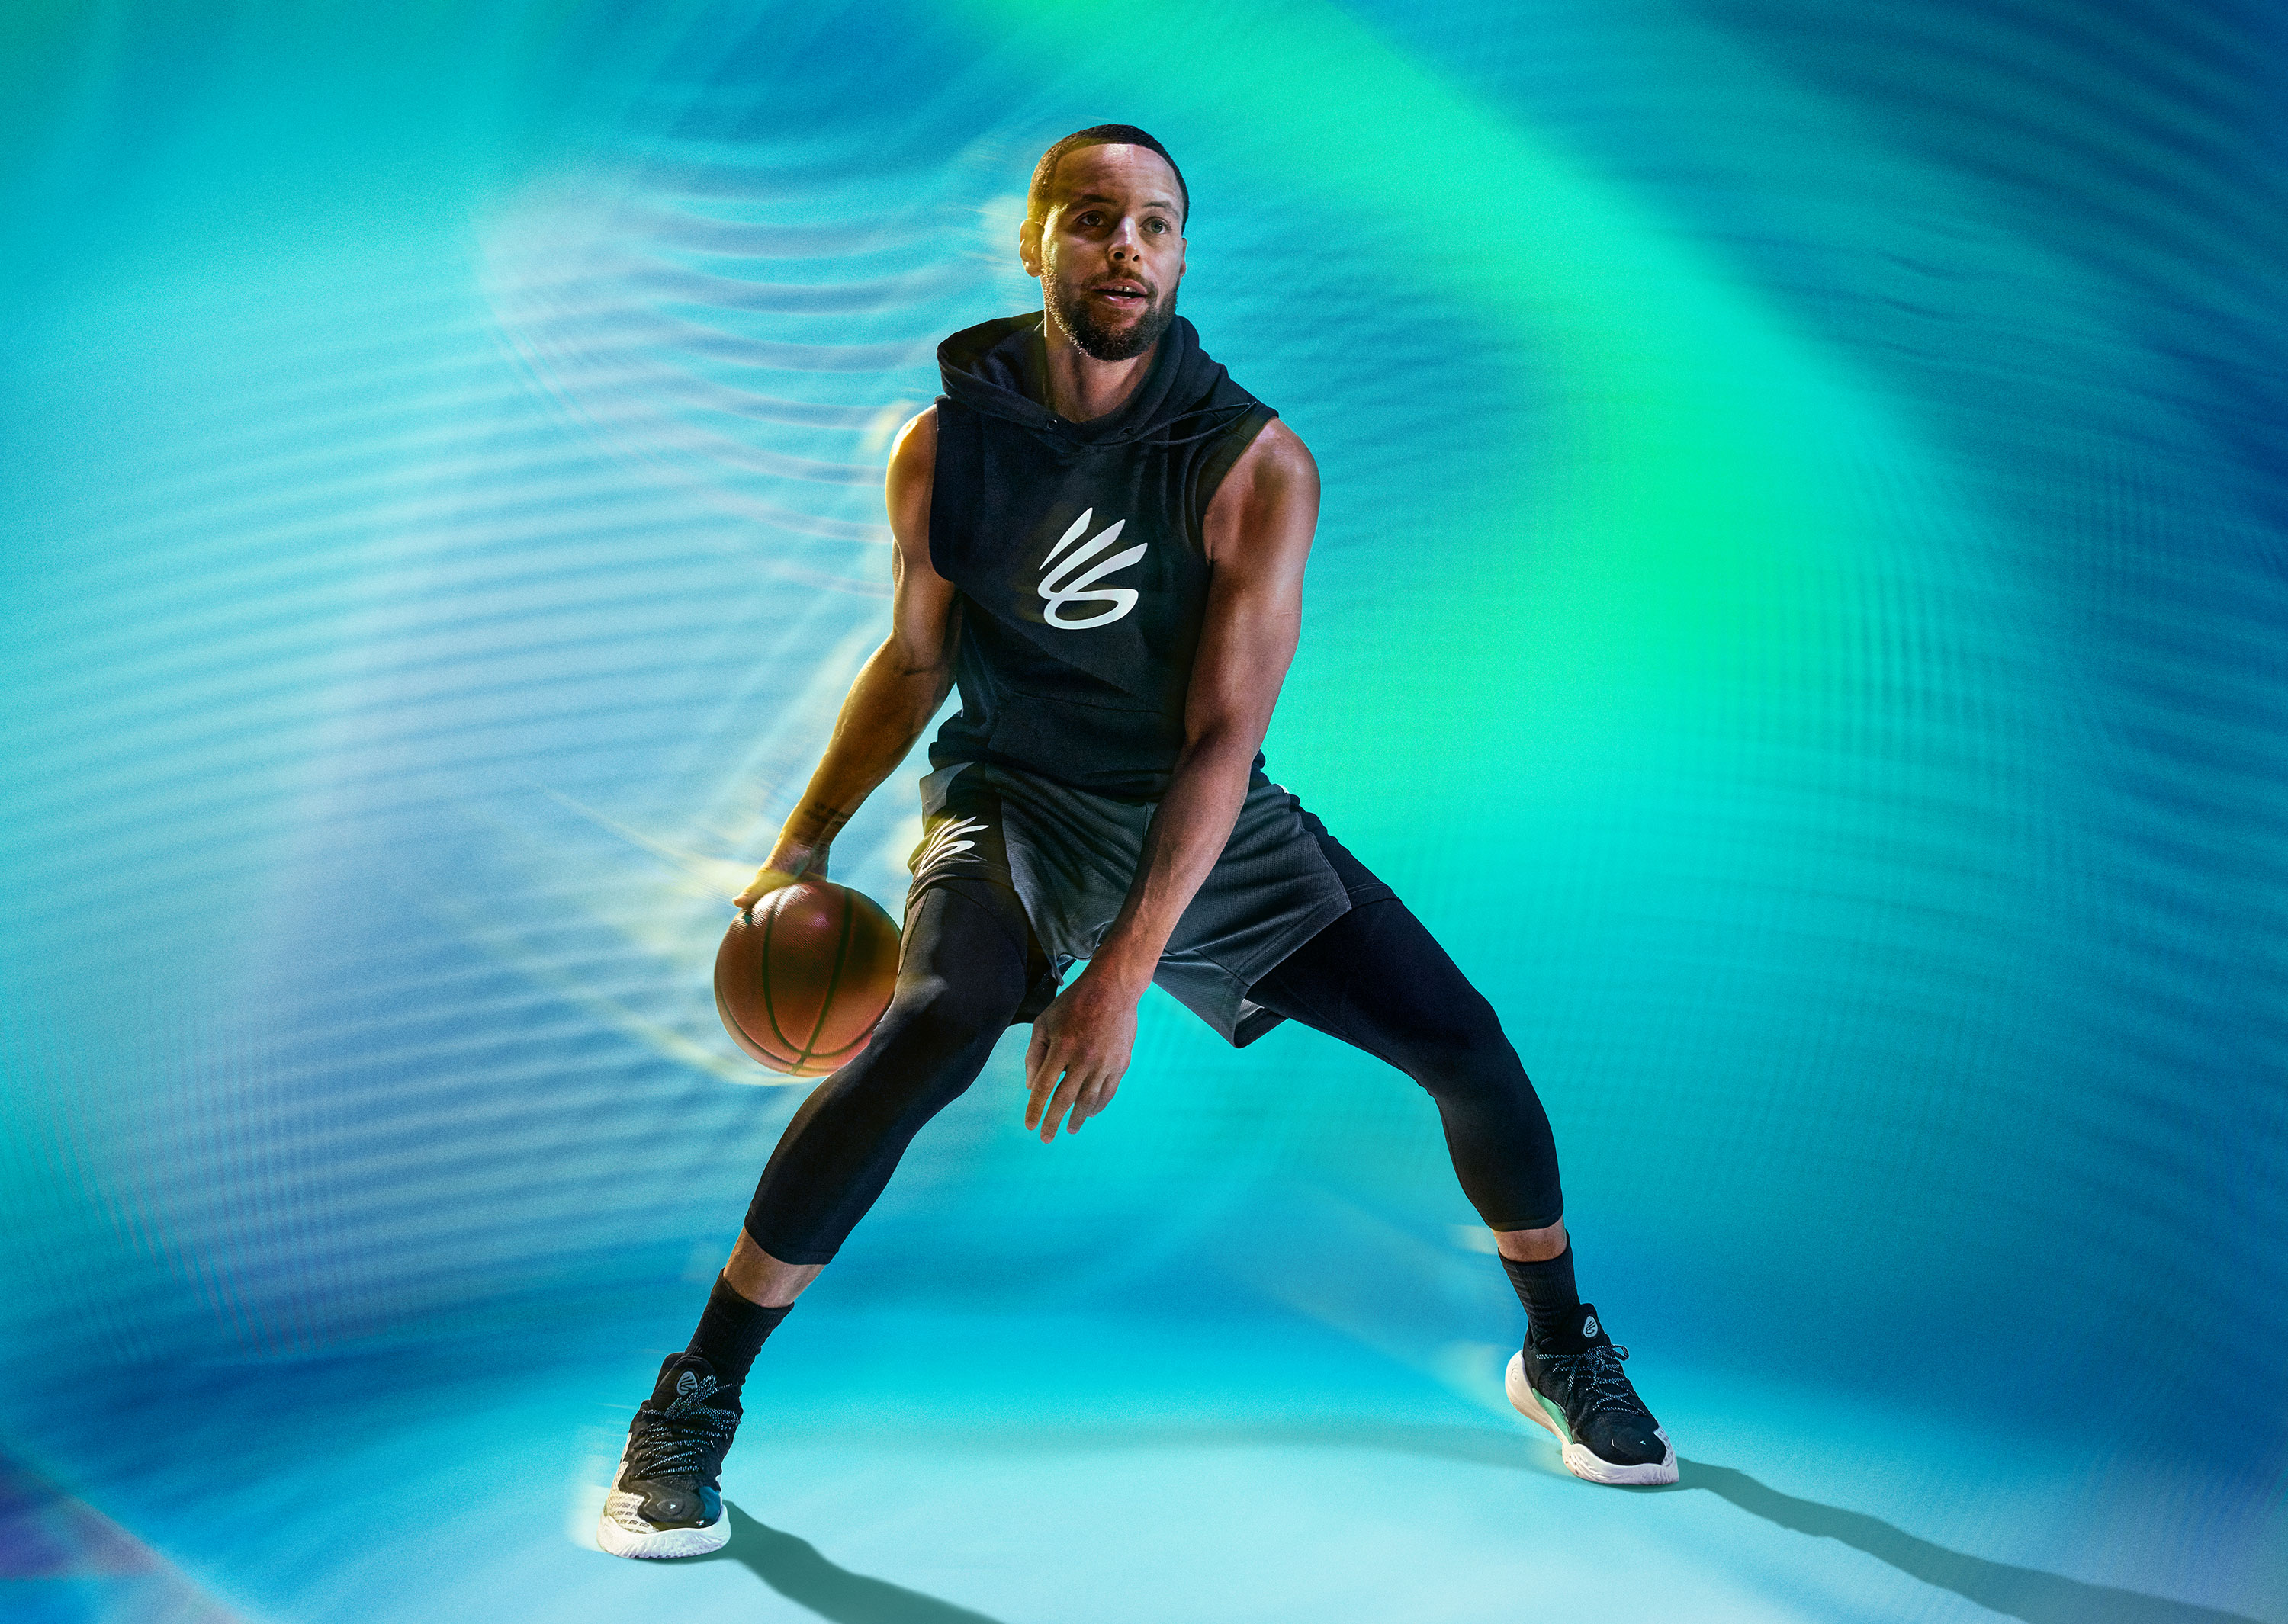 https://www.giantartists.com/images/pics/1361_rpMlzW_smith-under-armour-steph-curry-2023-17.jpg